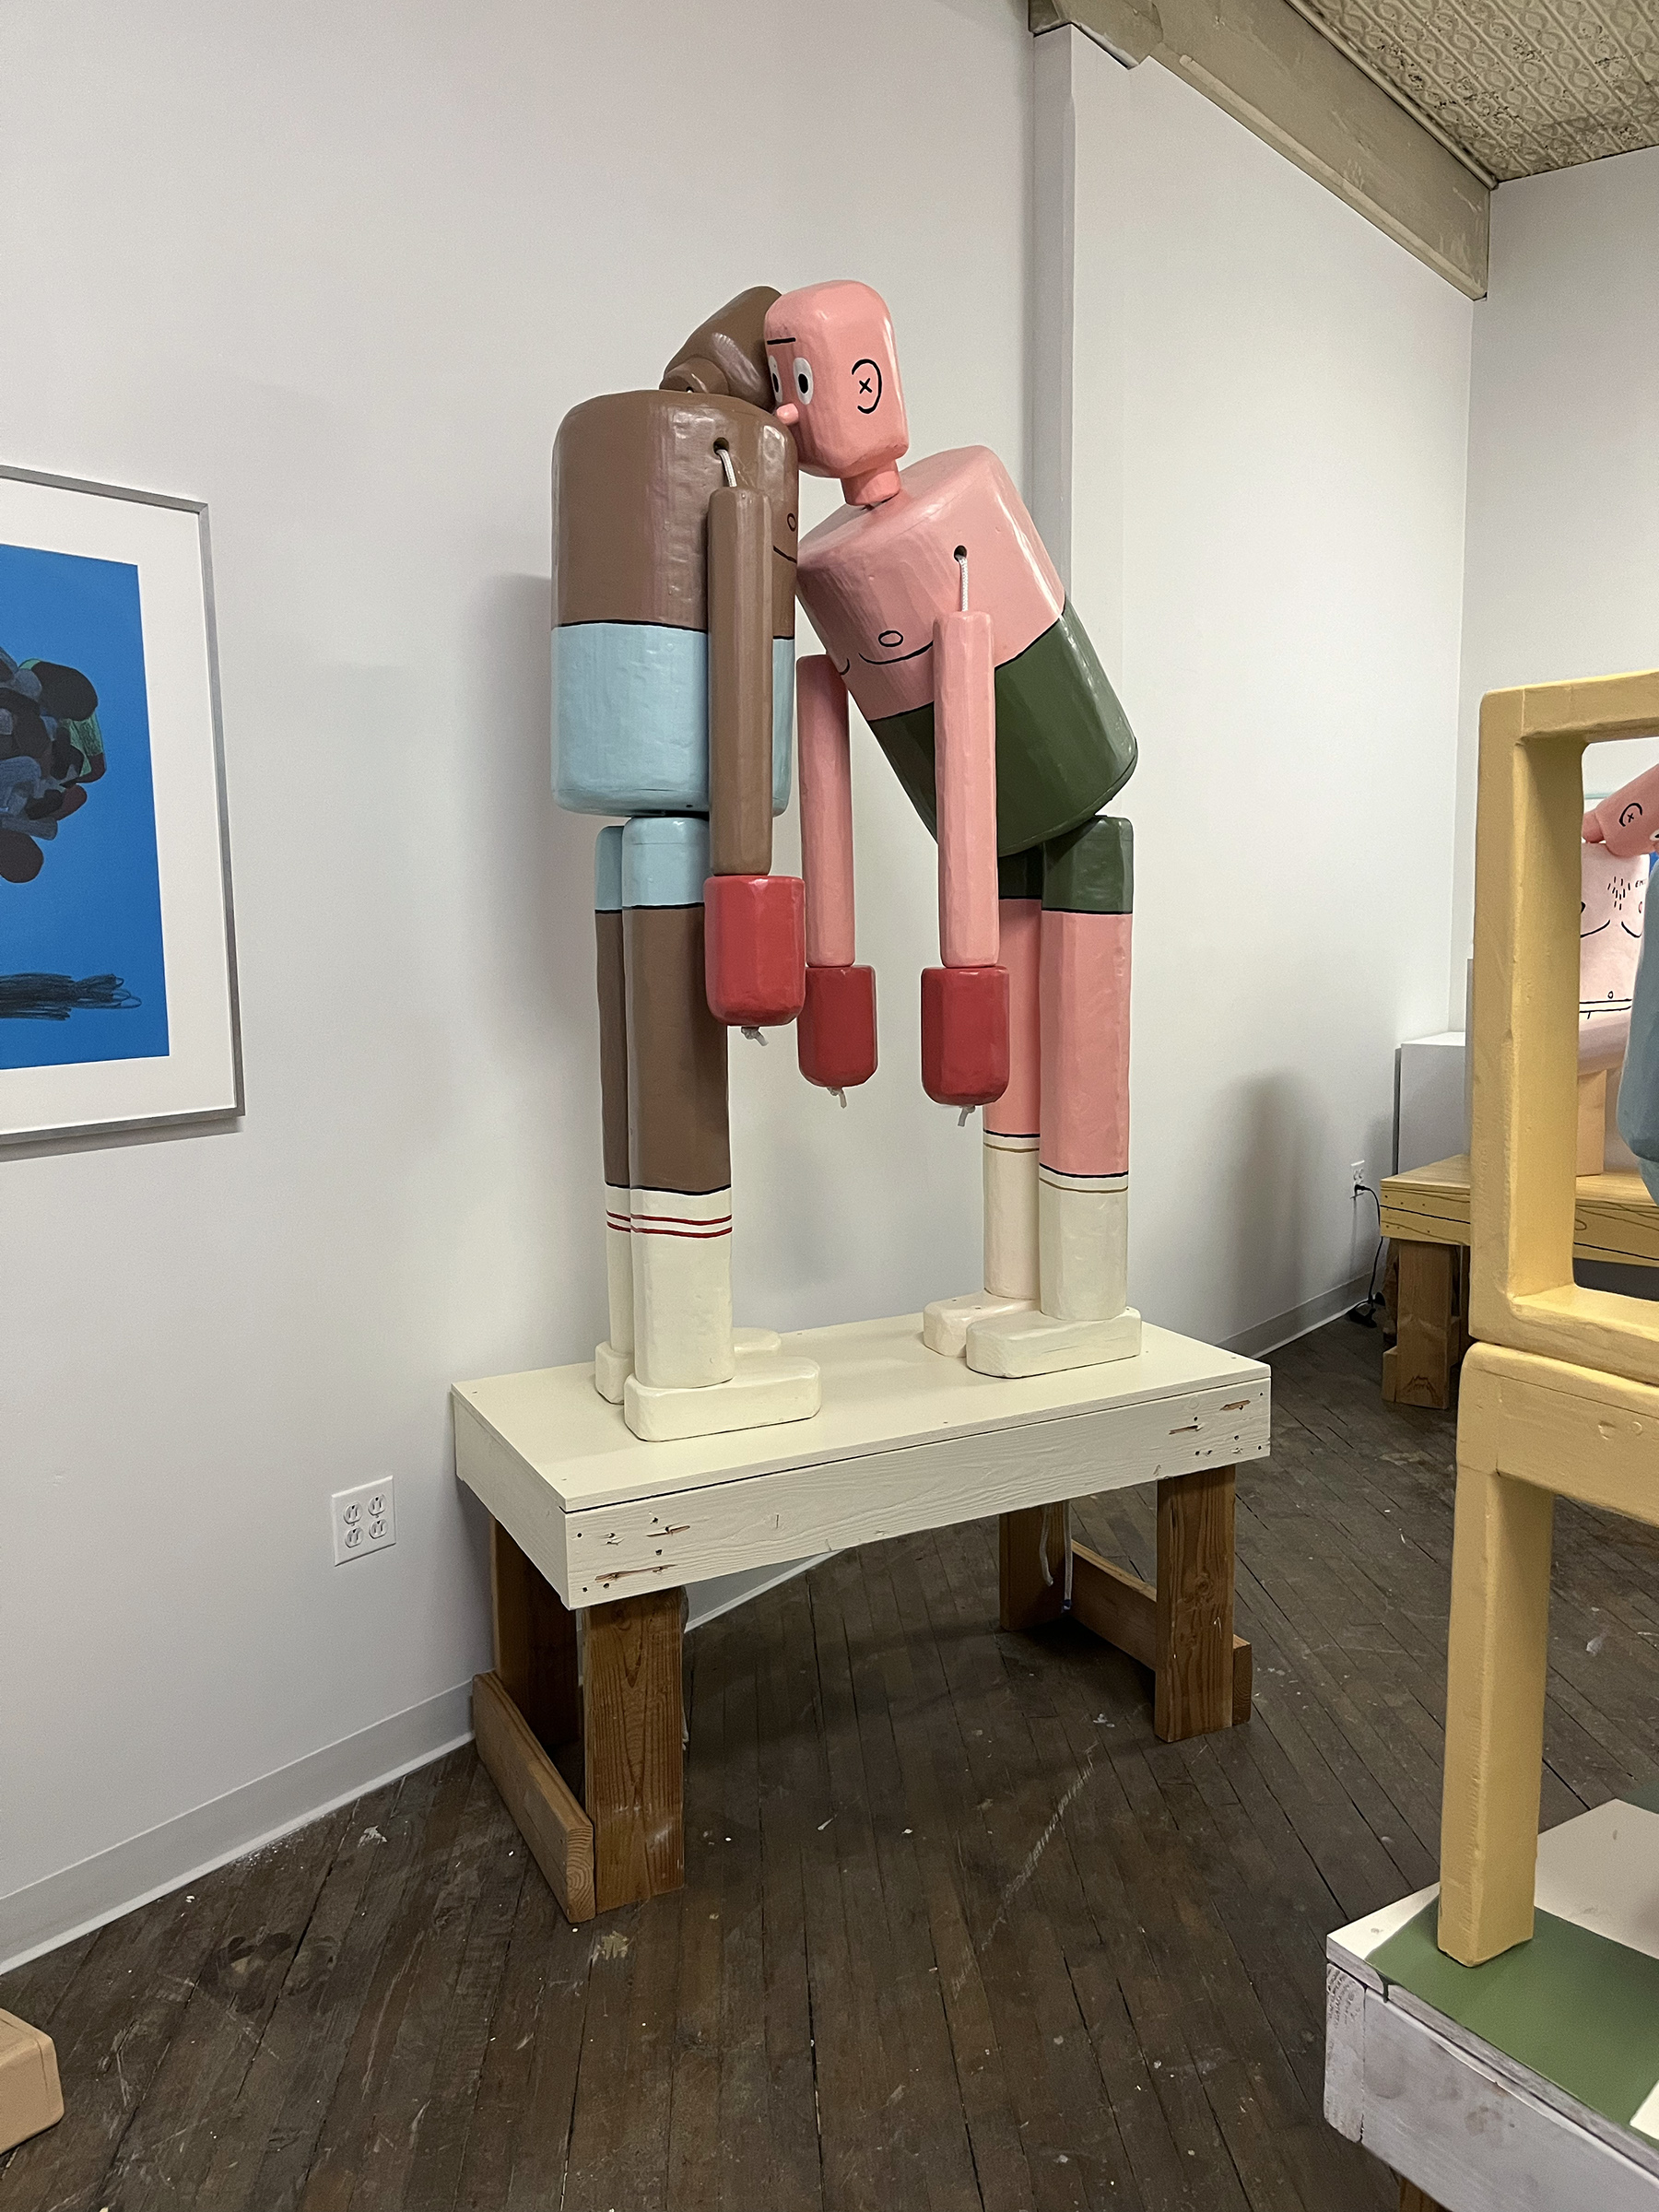 A photograph of two wooden, life-sized, figurative sculptures that resemble push puppet toys. The two figures are painted to look like boxers. One sculpture’s head rests on the other sculpture’s shoulder.